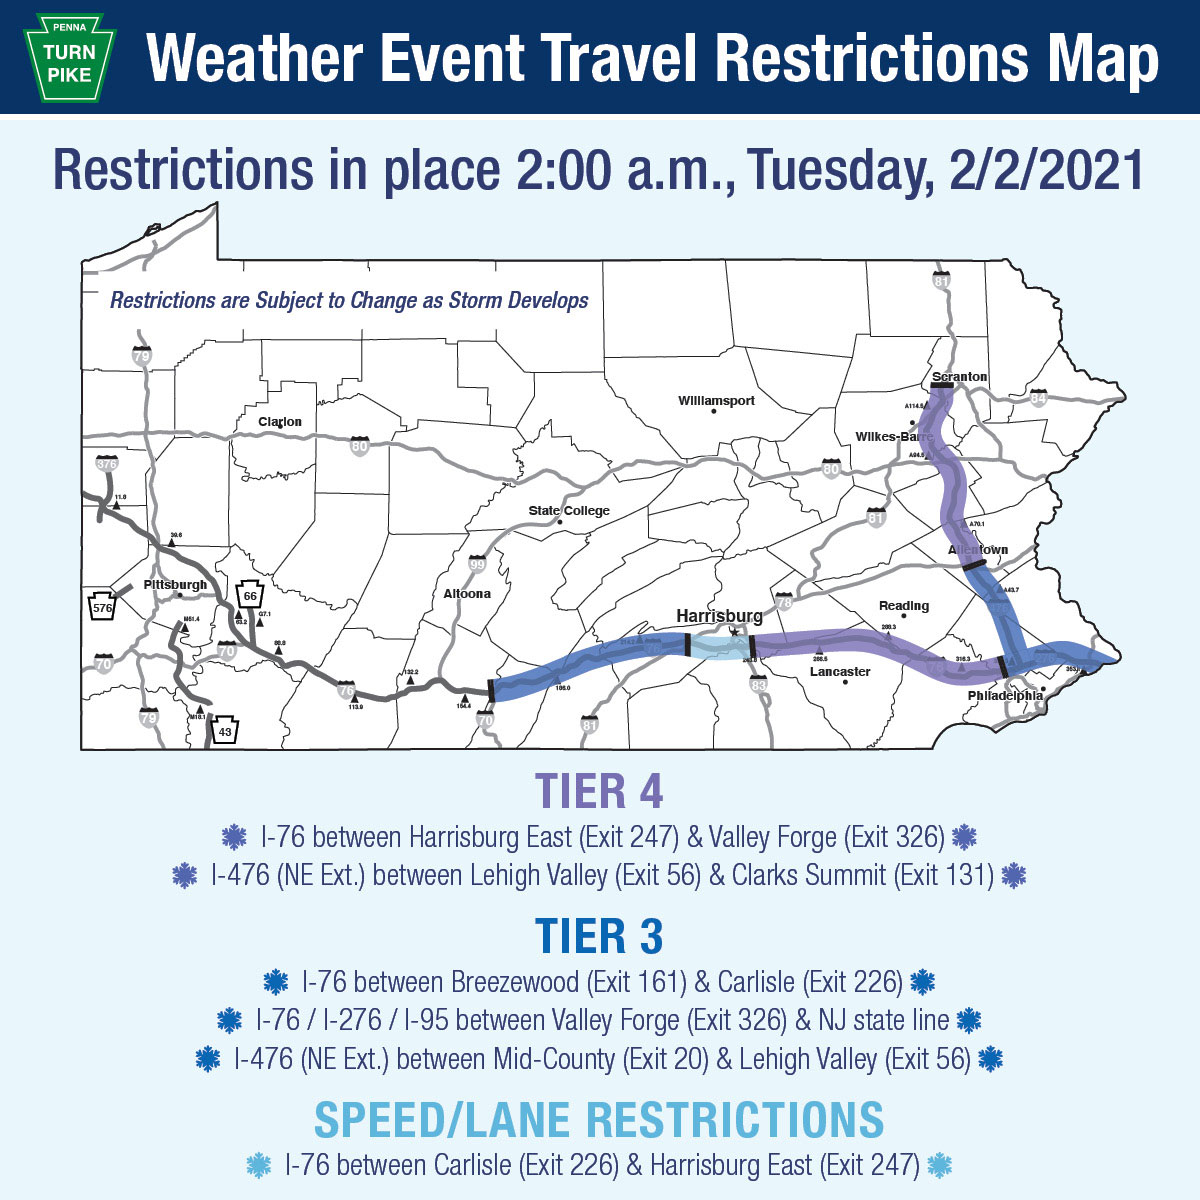 Restrictions in place 2:00 a.m., Tuesday, 2/2/2021 - Tier 4, Tier3, Speed/Lane Restrictions